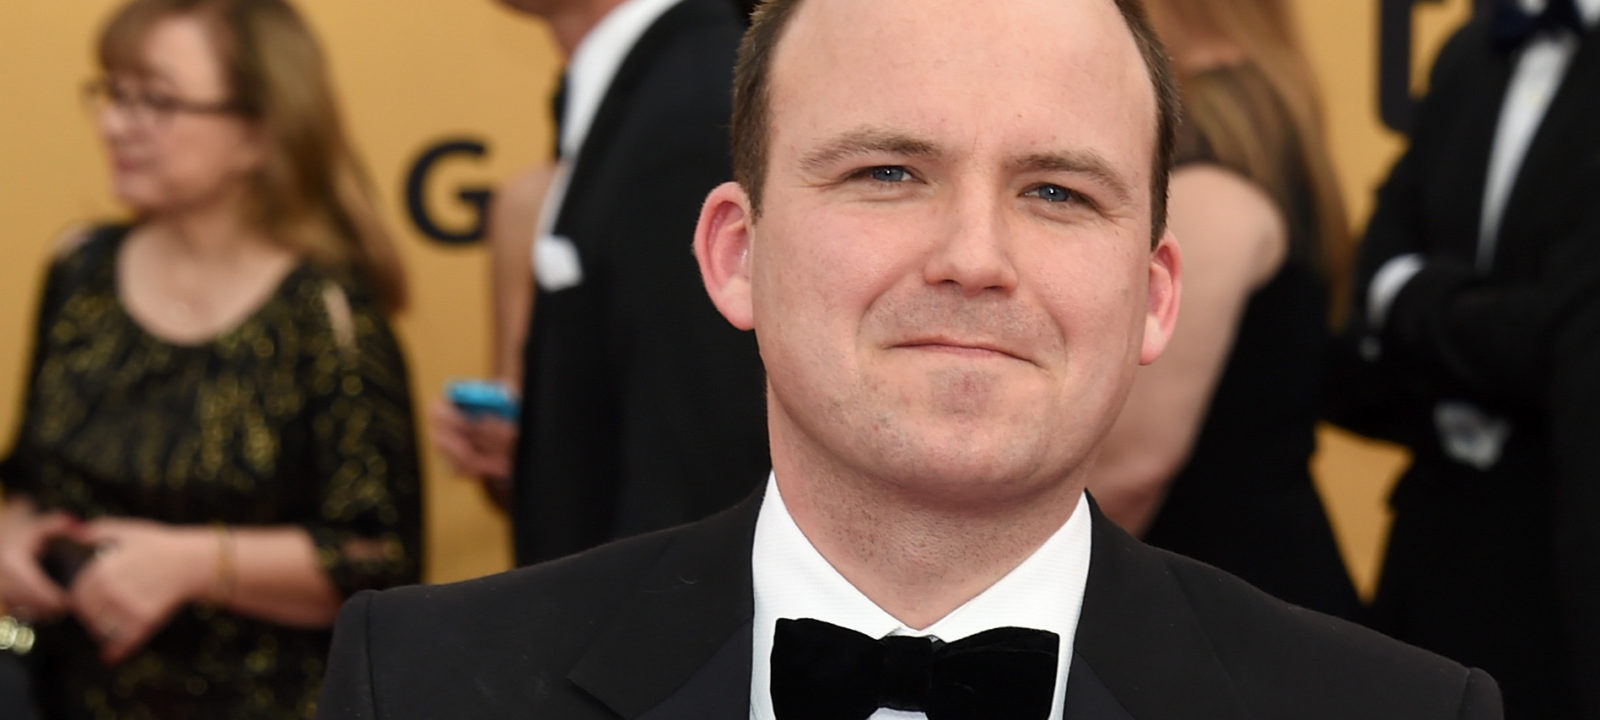 LOS ANGELES, CA - JANUARY 25:  Actor Rory Kinnear attends the 21st Annual Screen Actors Guild Awards at The Shrine Auditorium on January 25, 2015 in Los Angeles, California.  (Photo by Ethan Miller/Getty Images)